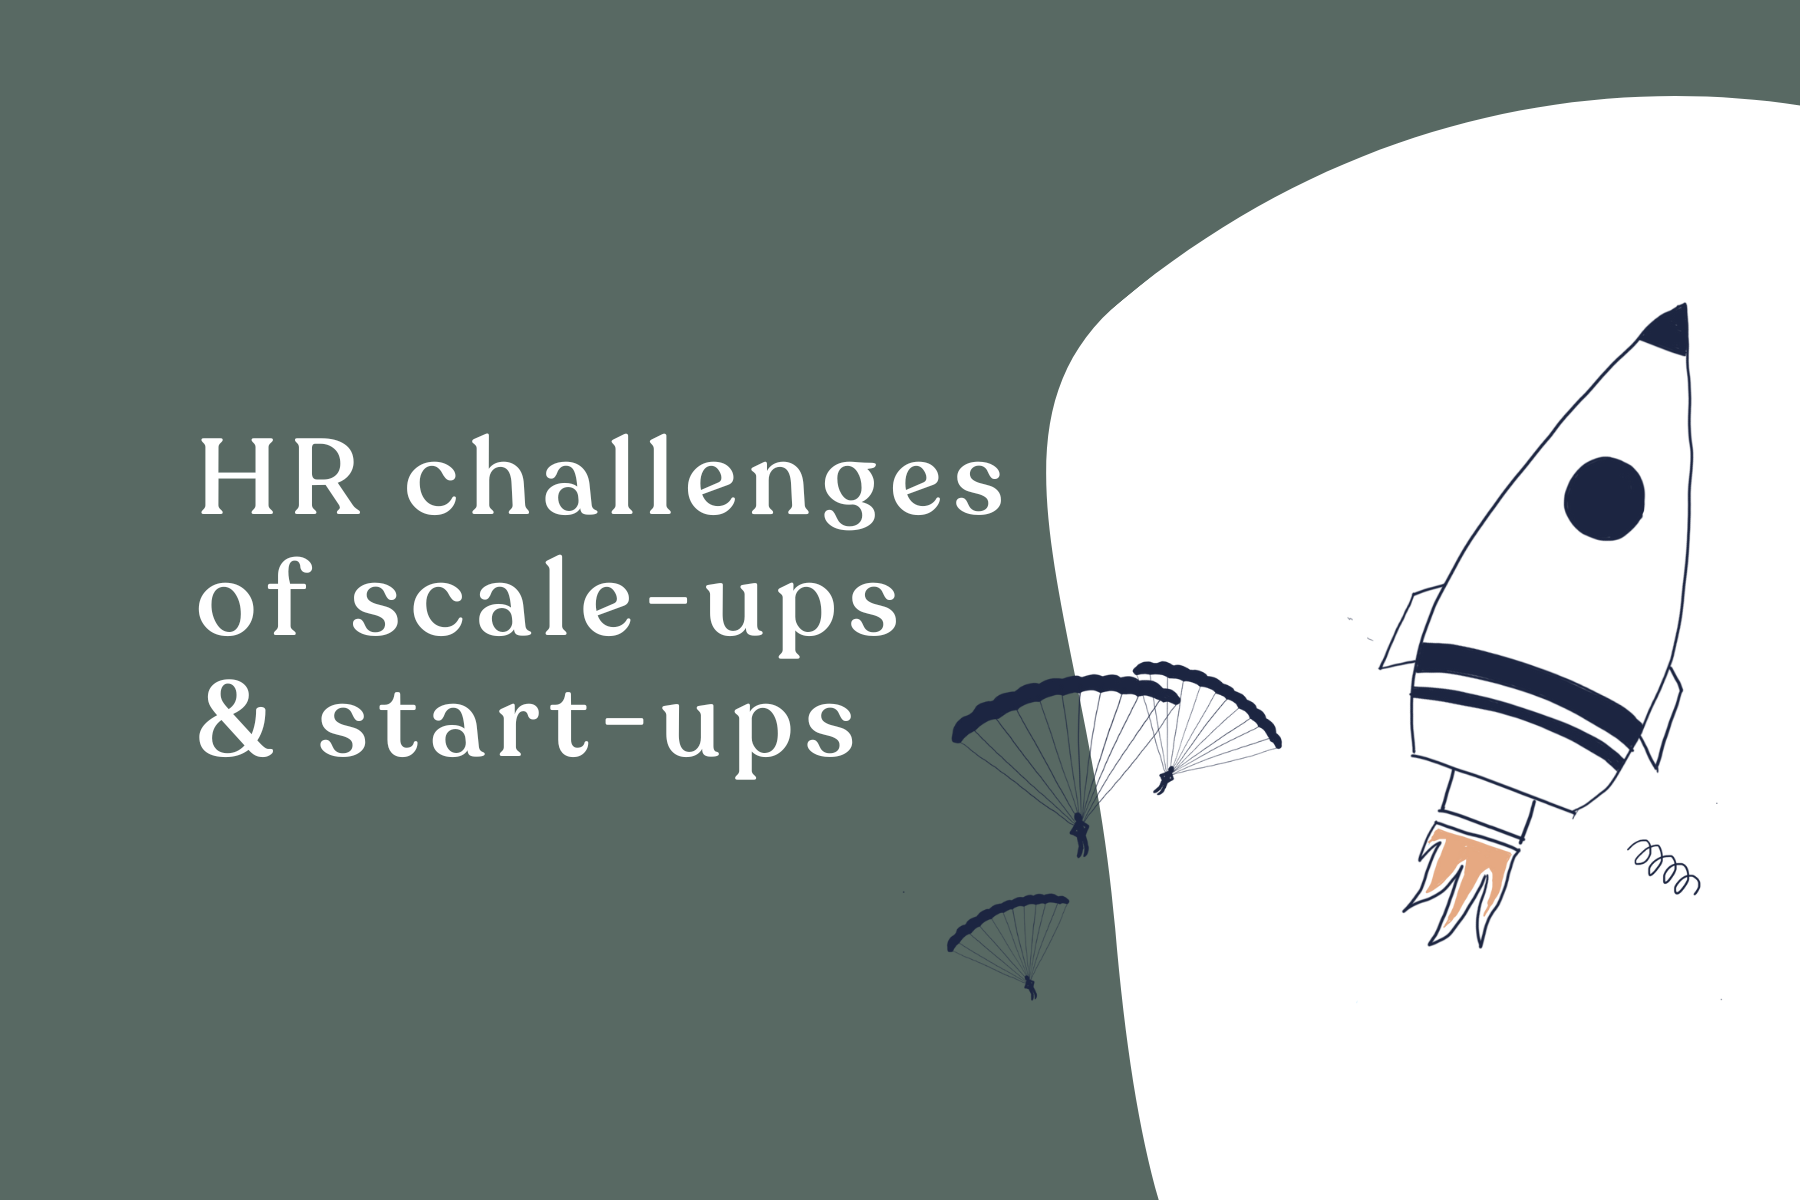 HR challenges of scale-ups and start-ups